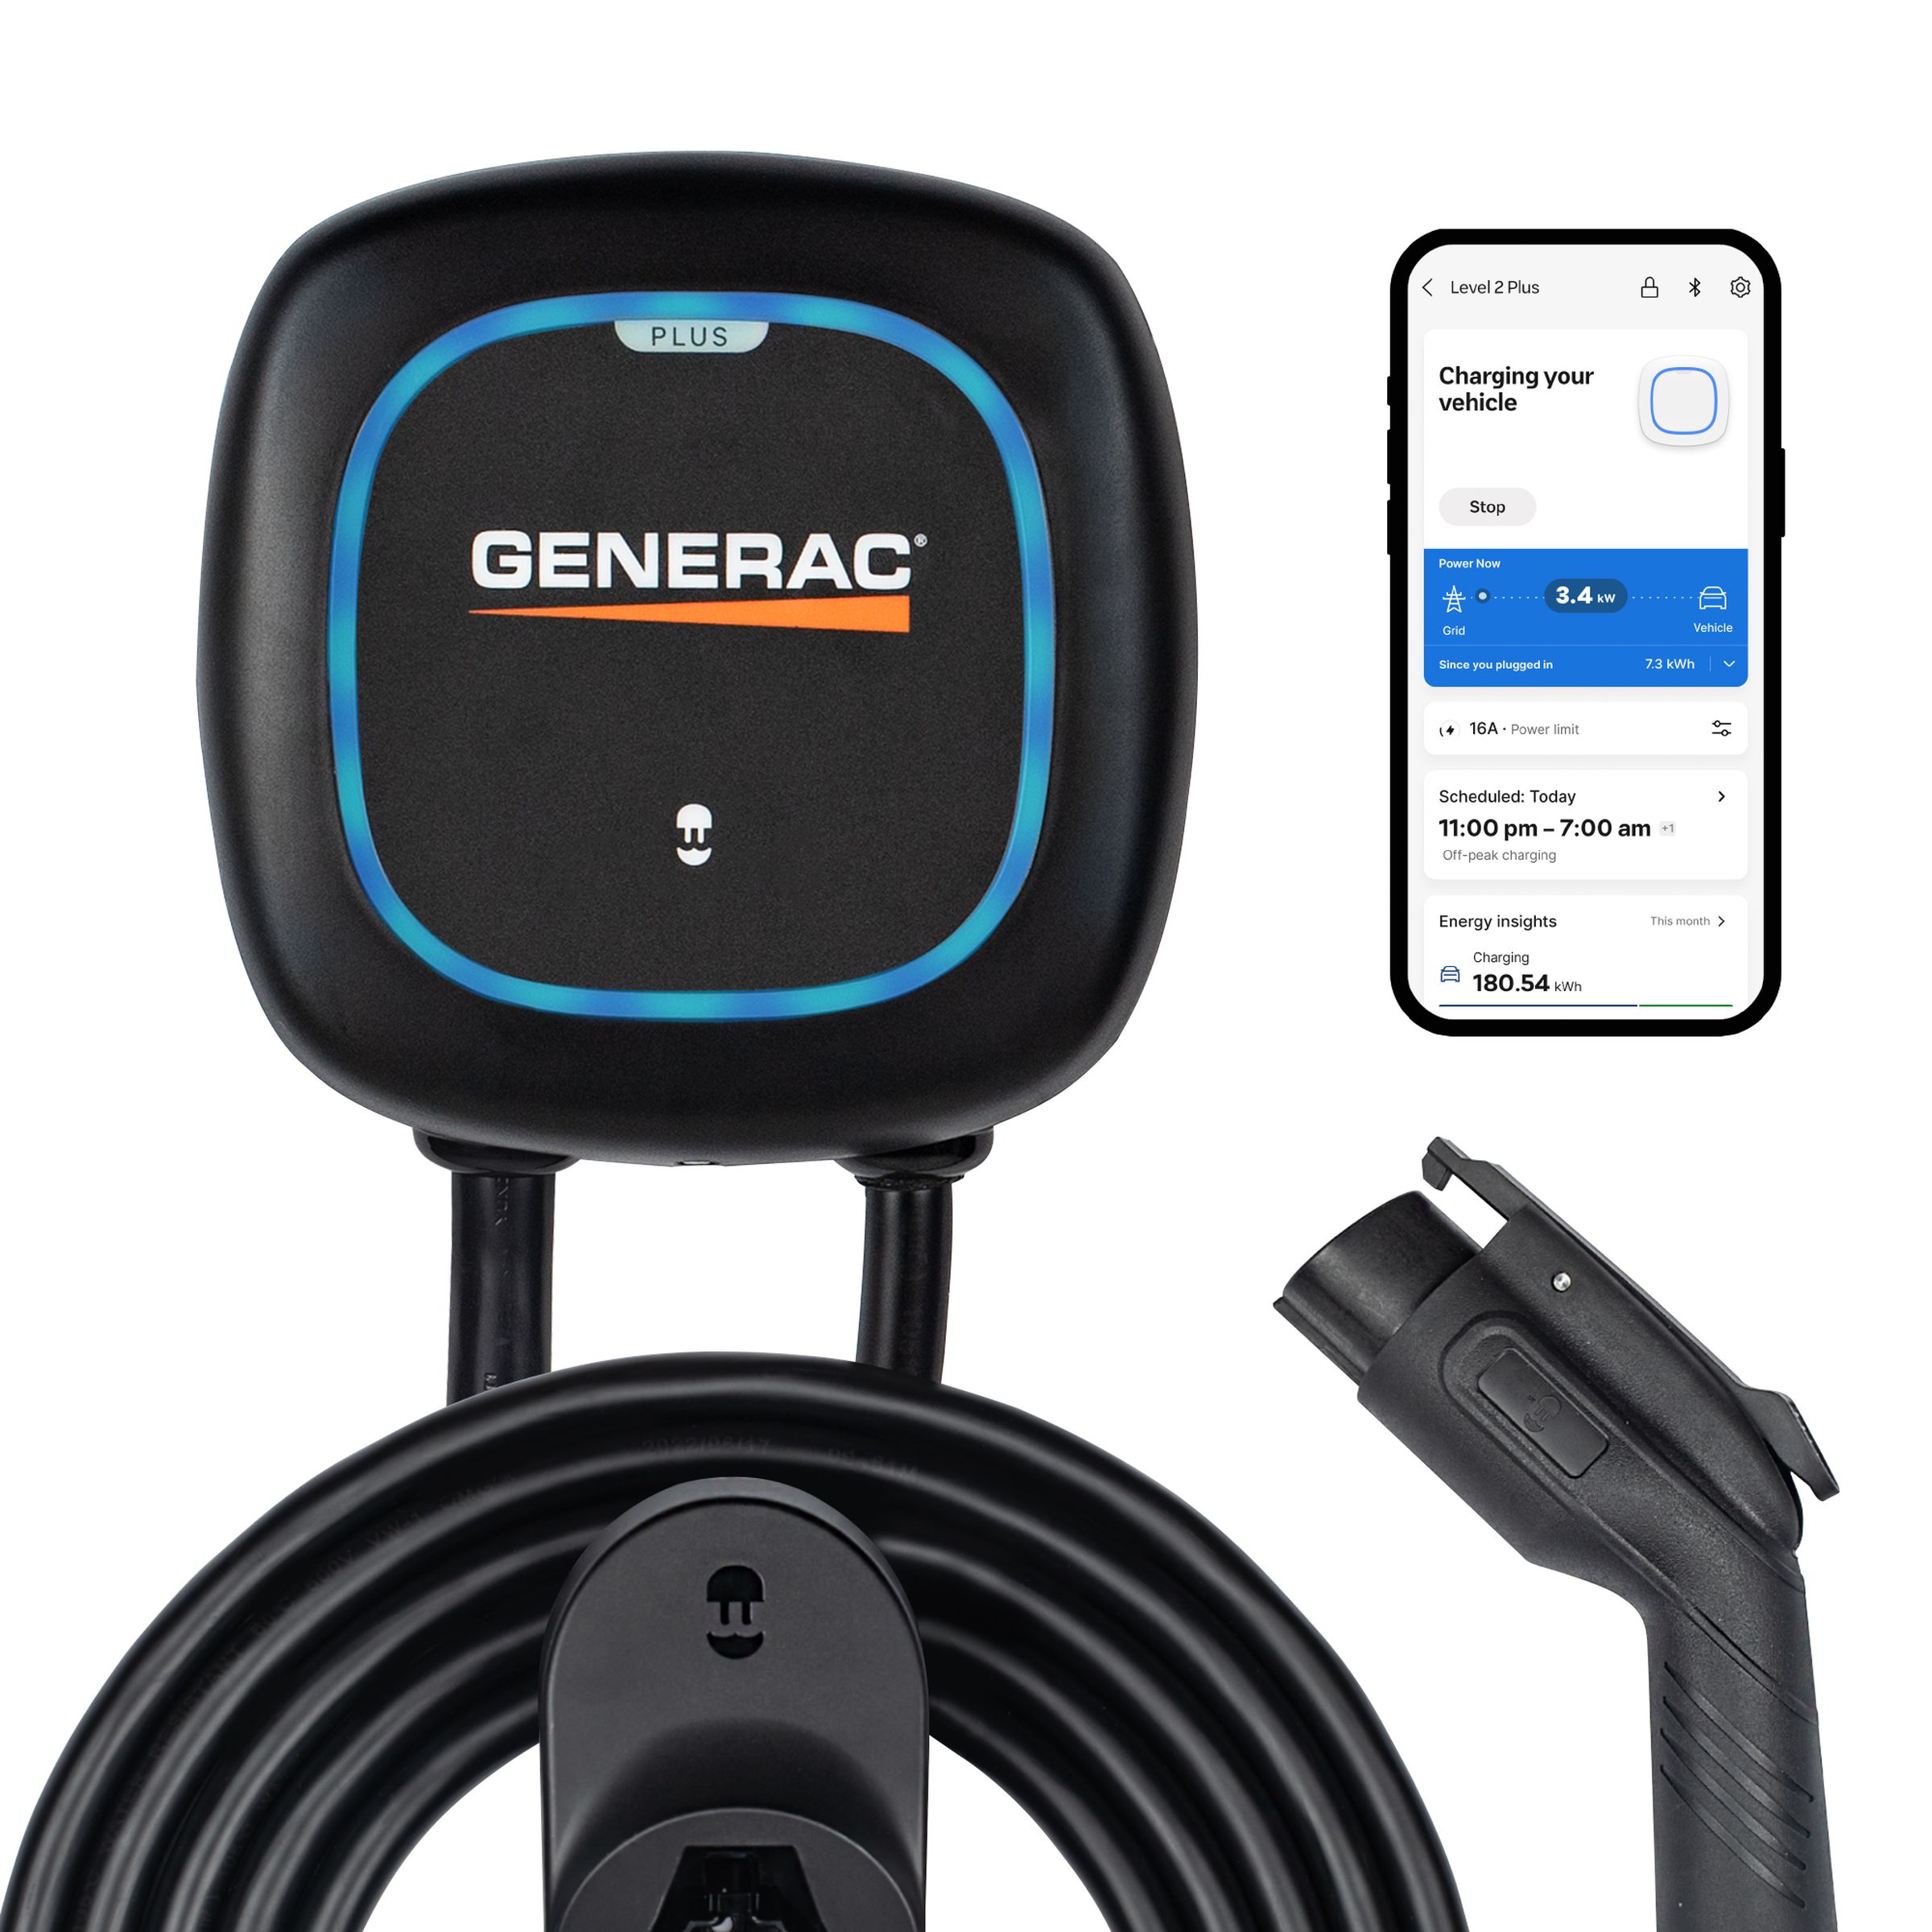 The Generac EV charger starts at $649.